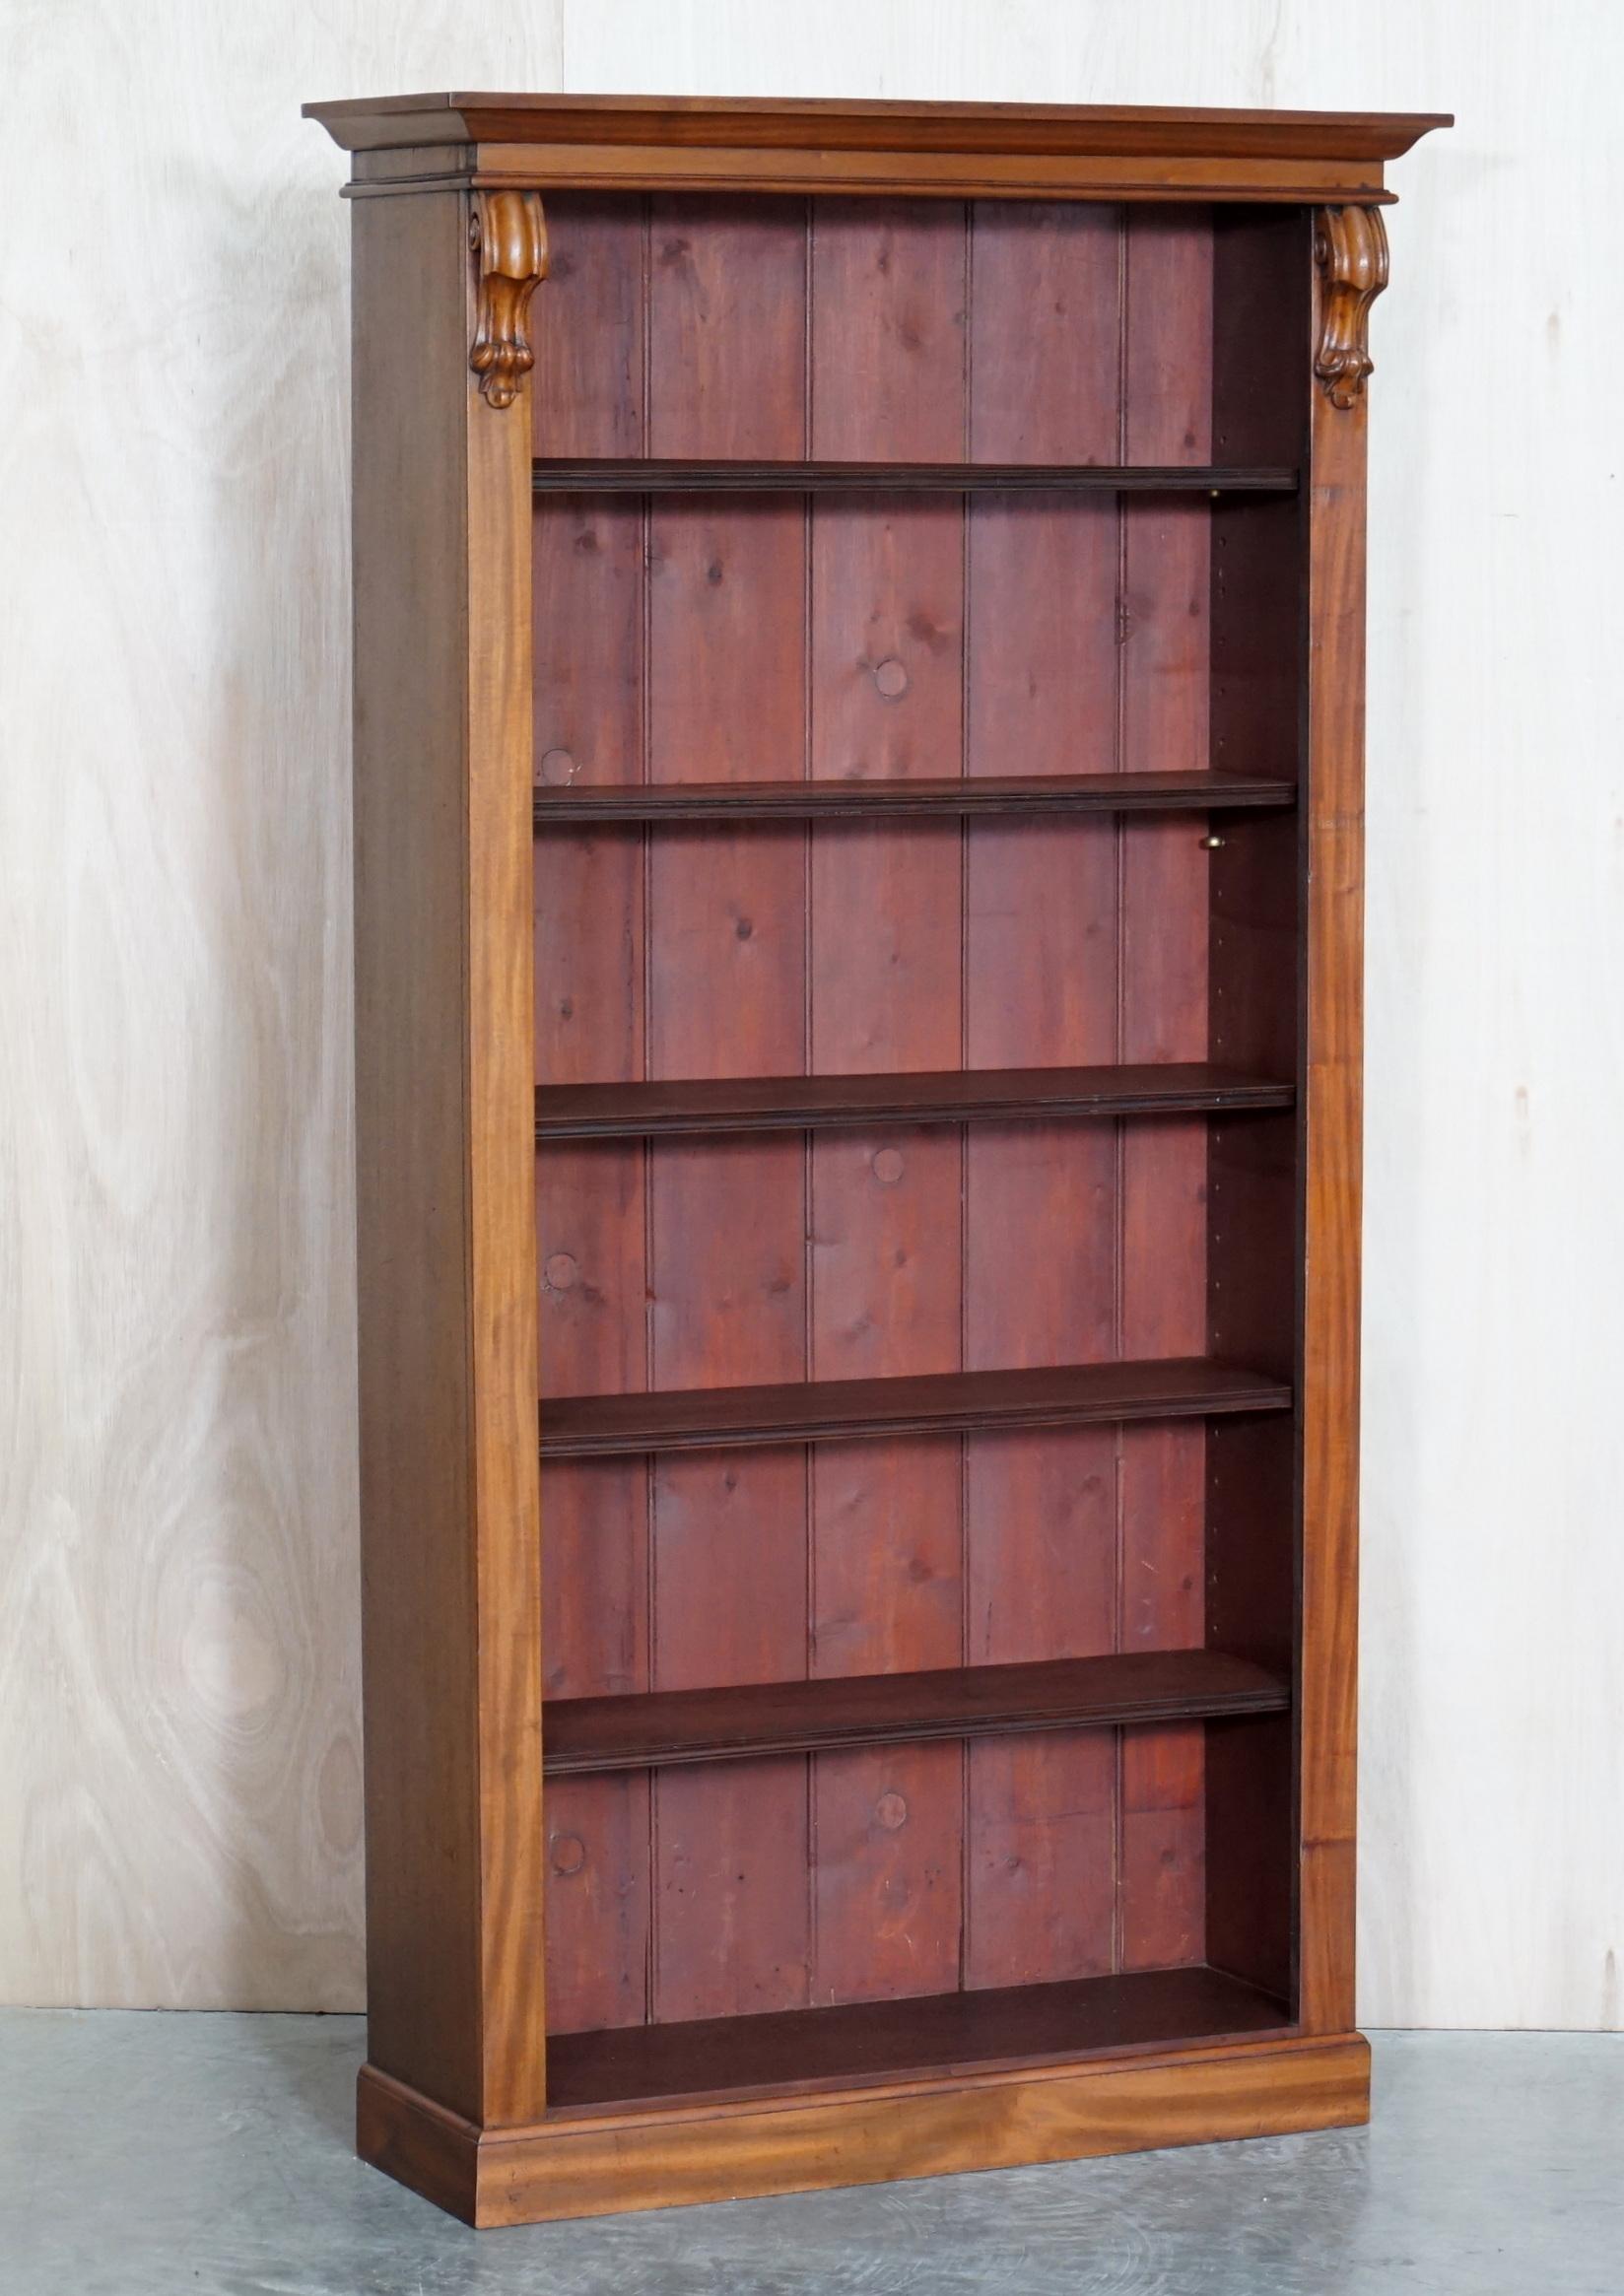 We are delighted to offer for sale this lovely pair of Victorian Mahogany open library bookcases with height adjustable shelves.

A good looking well made and decorative pair of bookcases. They are open bookcases so no doors as you can see, the